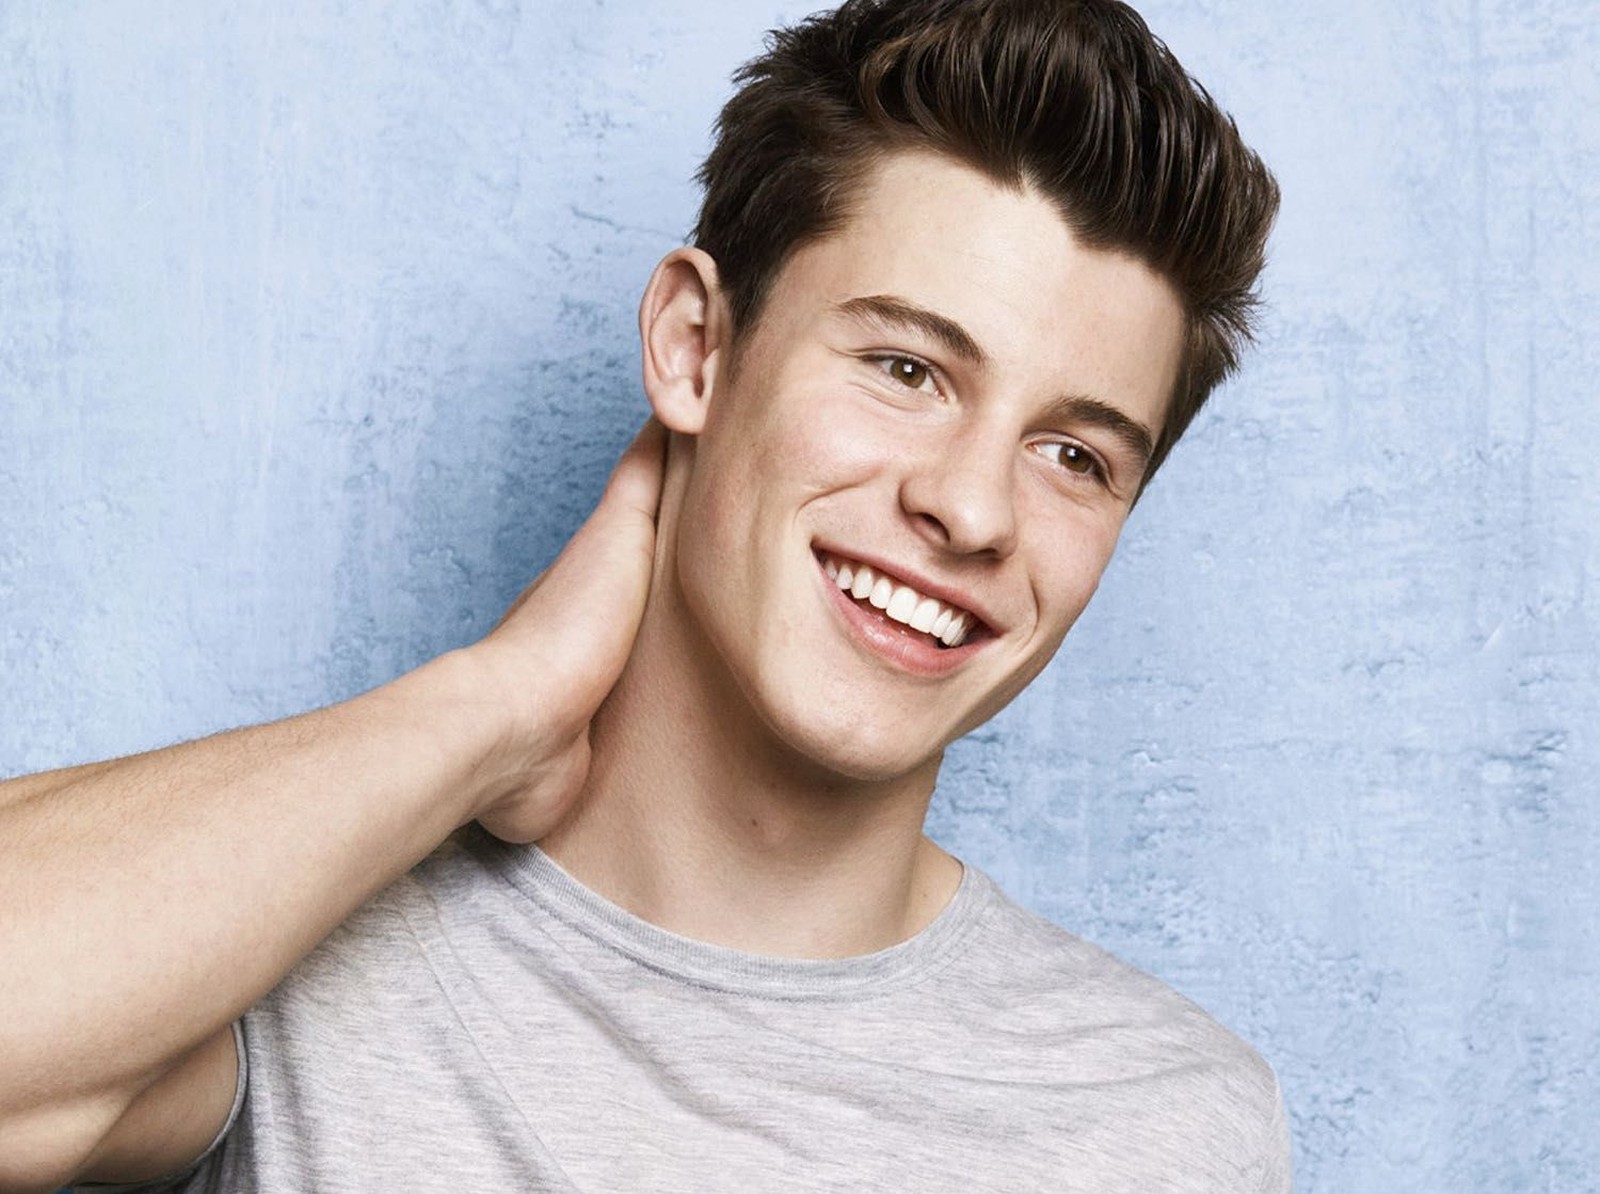 O cantor Shawn Mendes